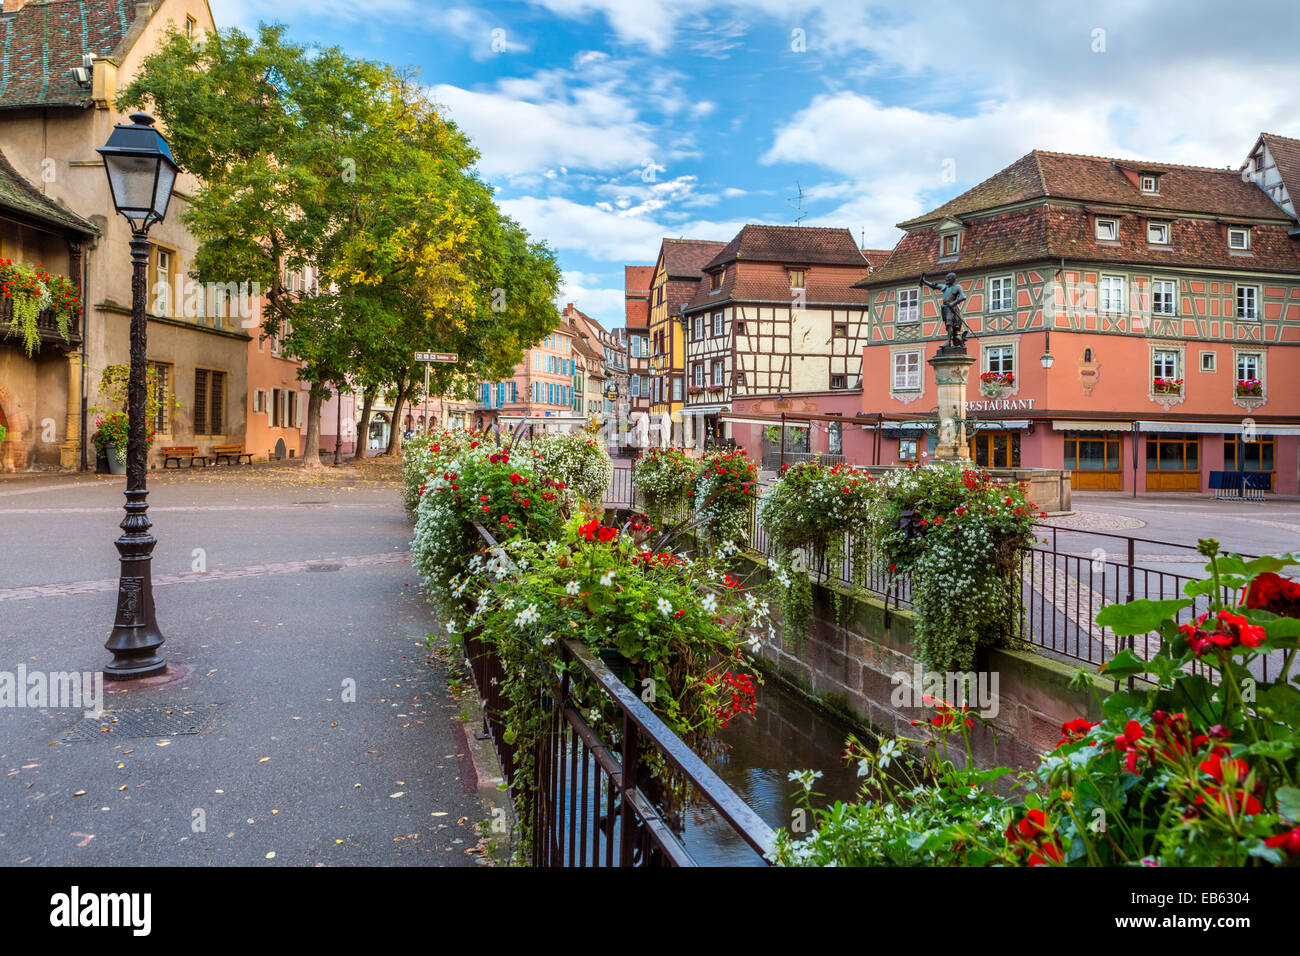 Old town in Colmar, Alsace, France, Europe. Stock Photo